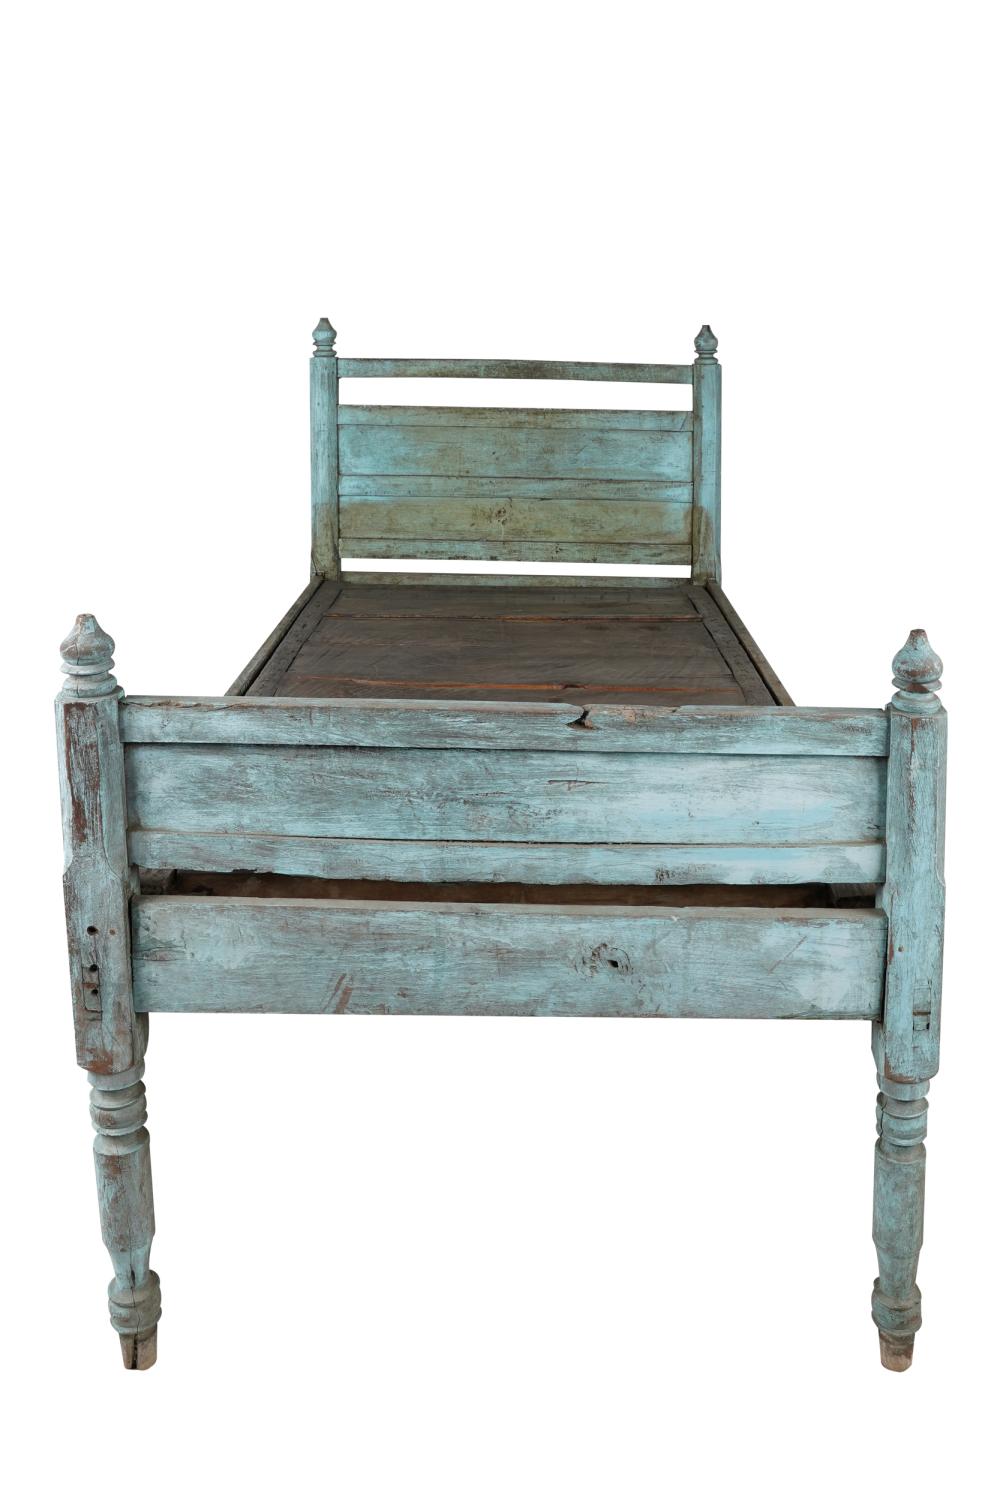 INDONESIAN PAINTED WOOD DAY BEDCondition: